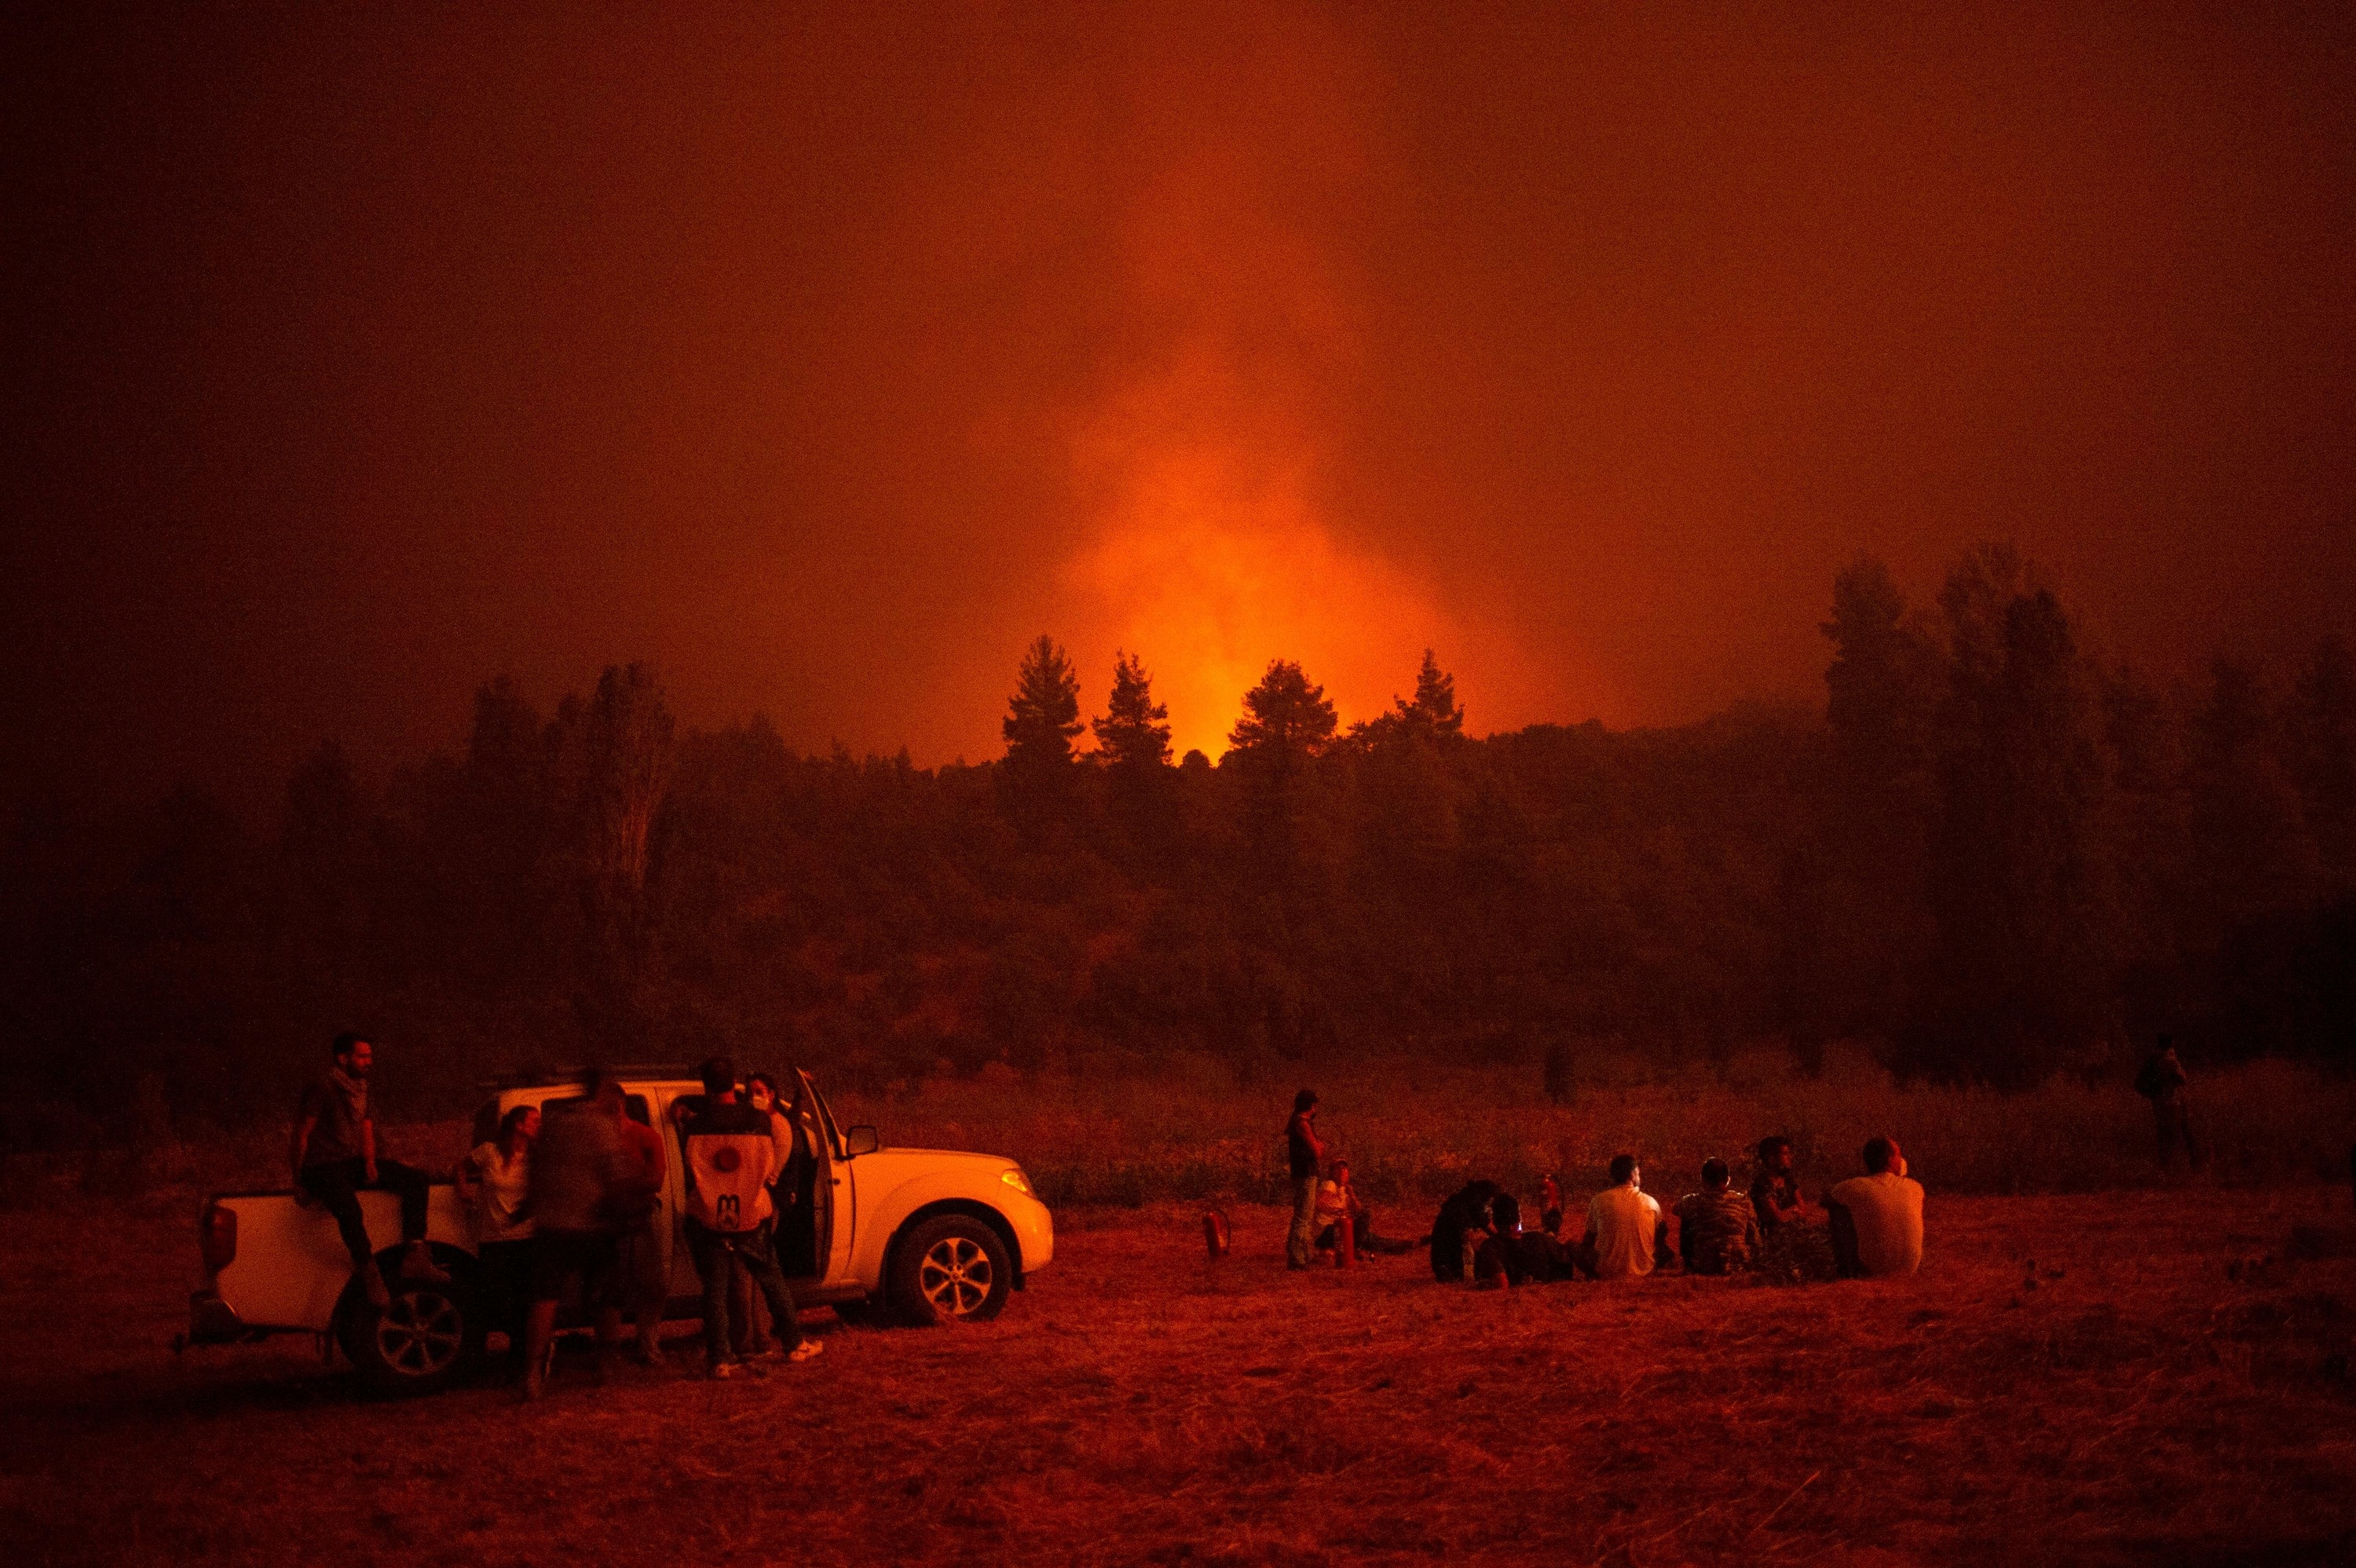 People sit in a meadow under a smoky, hazy sky as a fire burns beyond the horizon